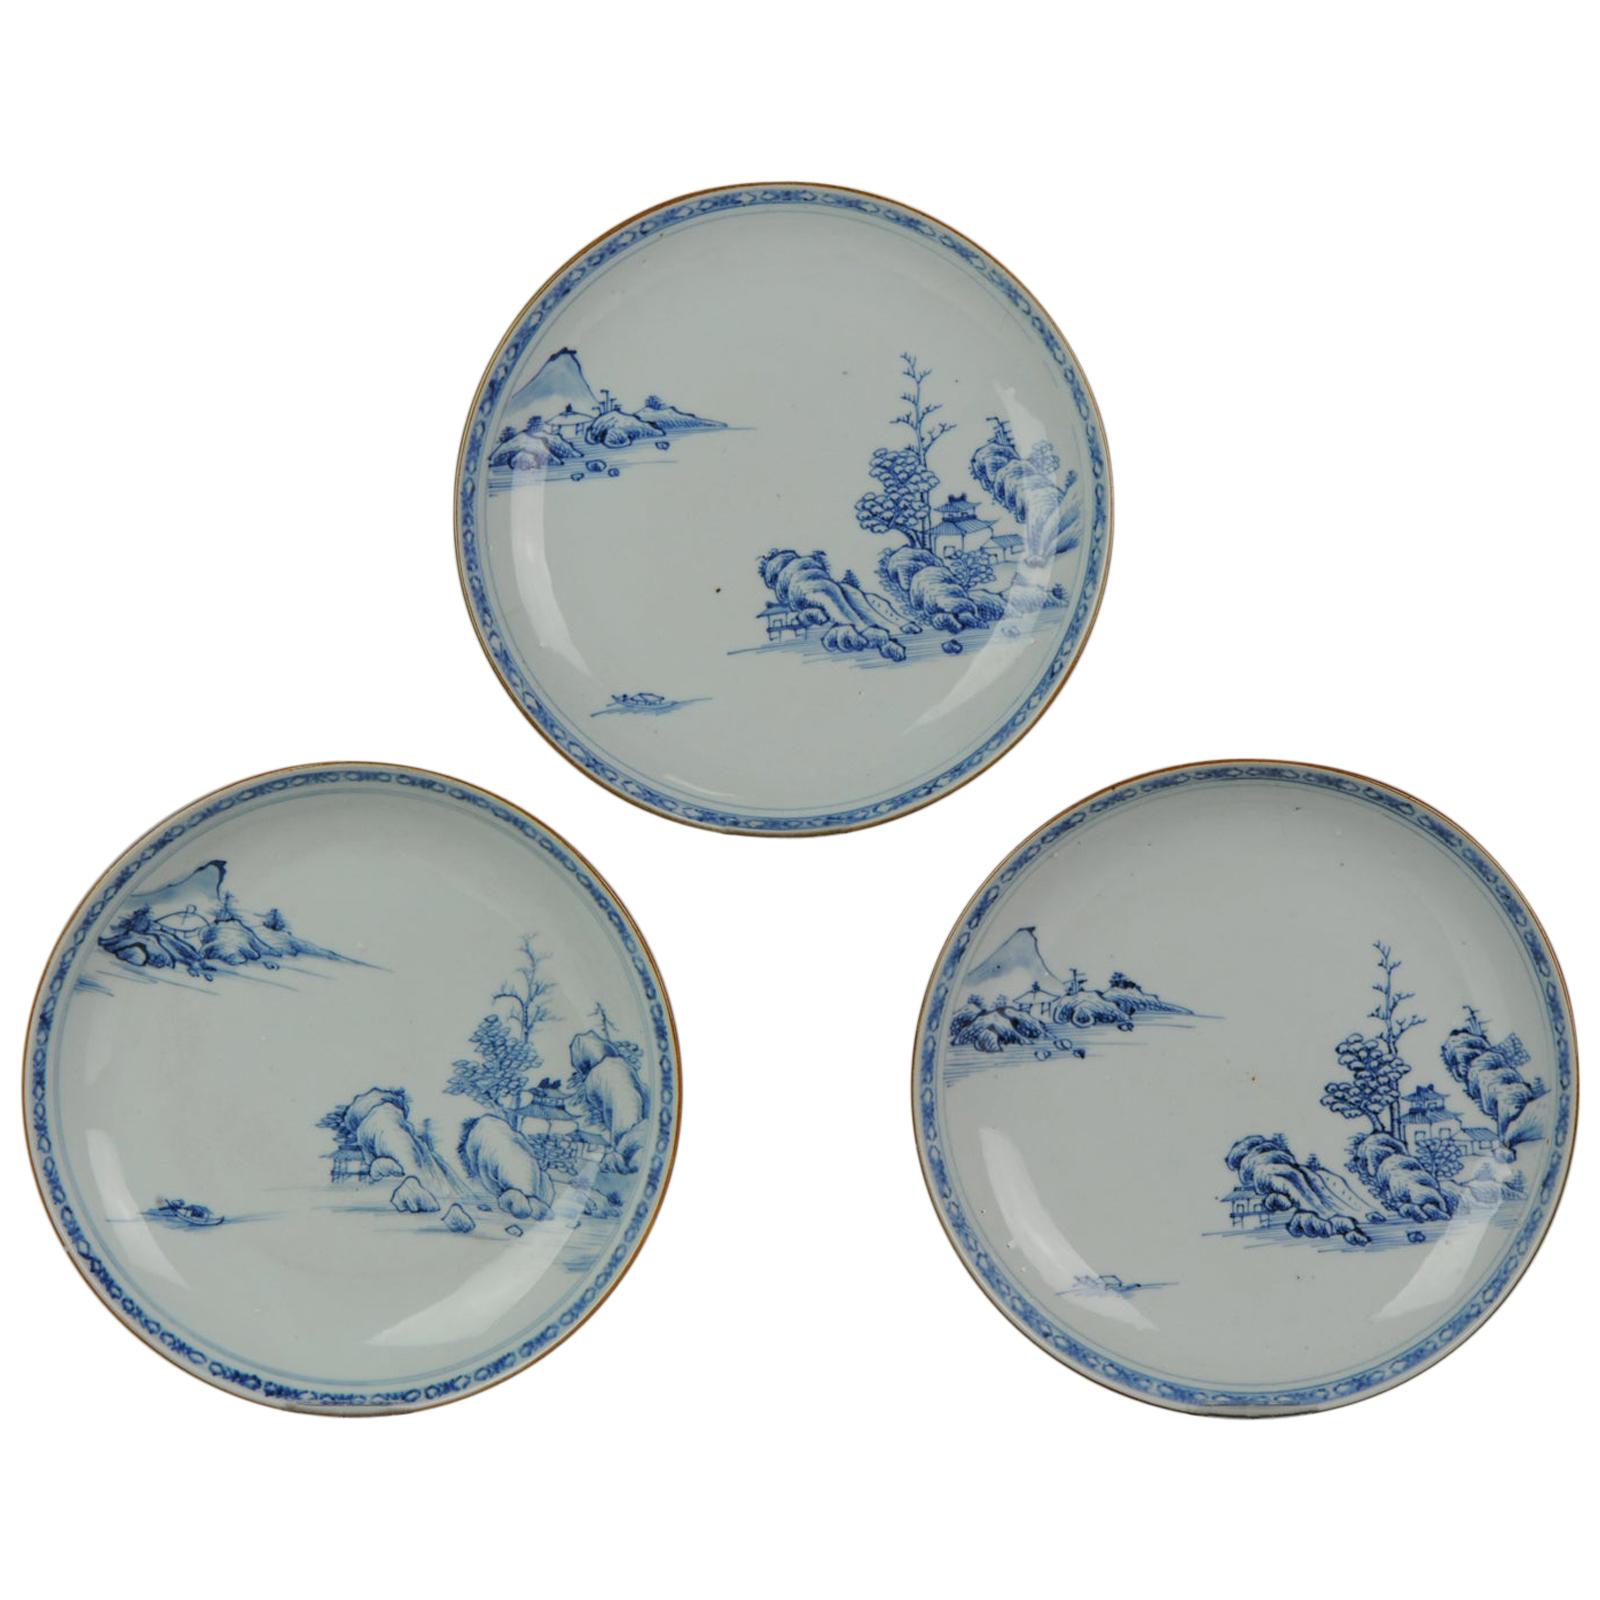 3 Antique 18th C Chinese Porcelain Qianlong Blue and White Plates Landscape  For Sale at 1stDibs | antique blue and white porcelain plates, antique blue  and white plates, antique blue plates